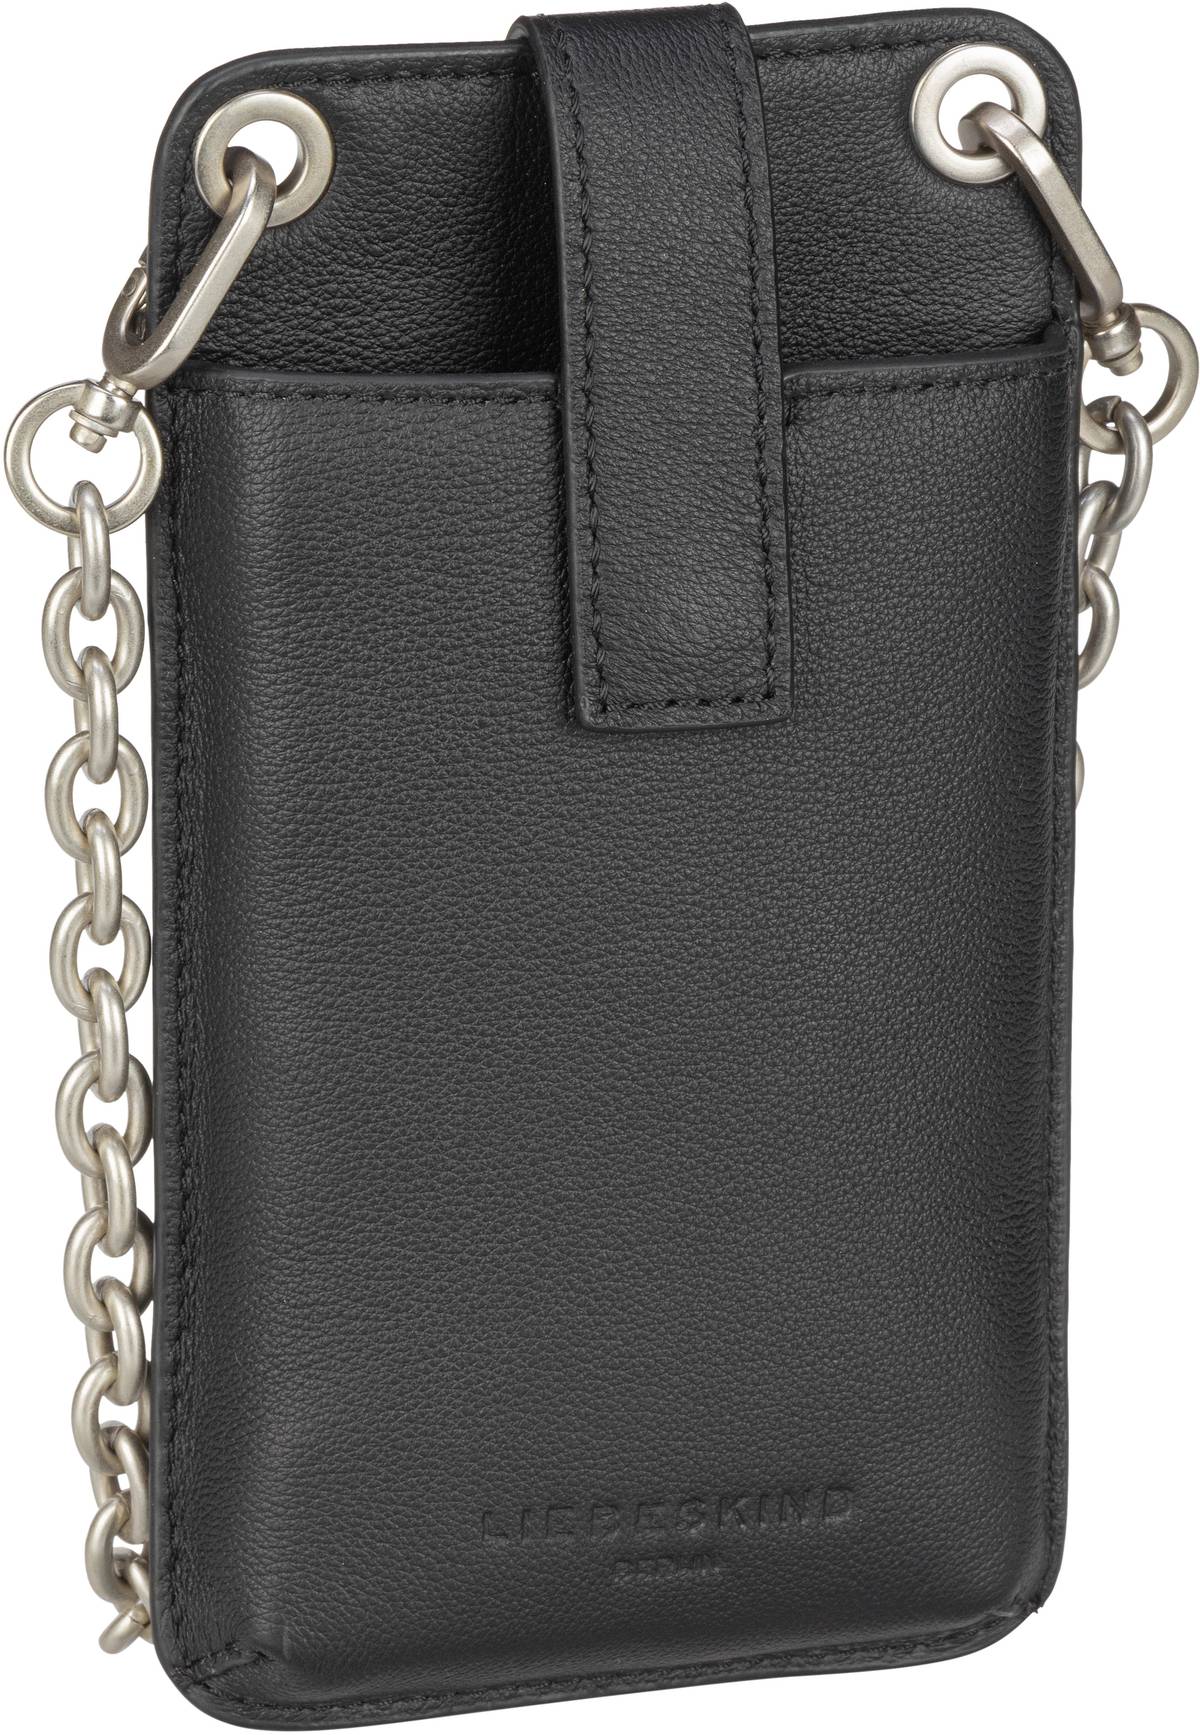 Liebeskind Berlin Basic Mobile Pouch - Black